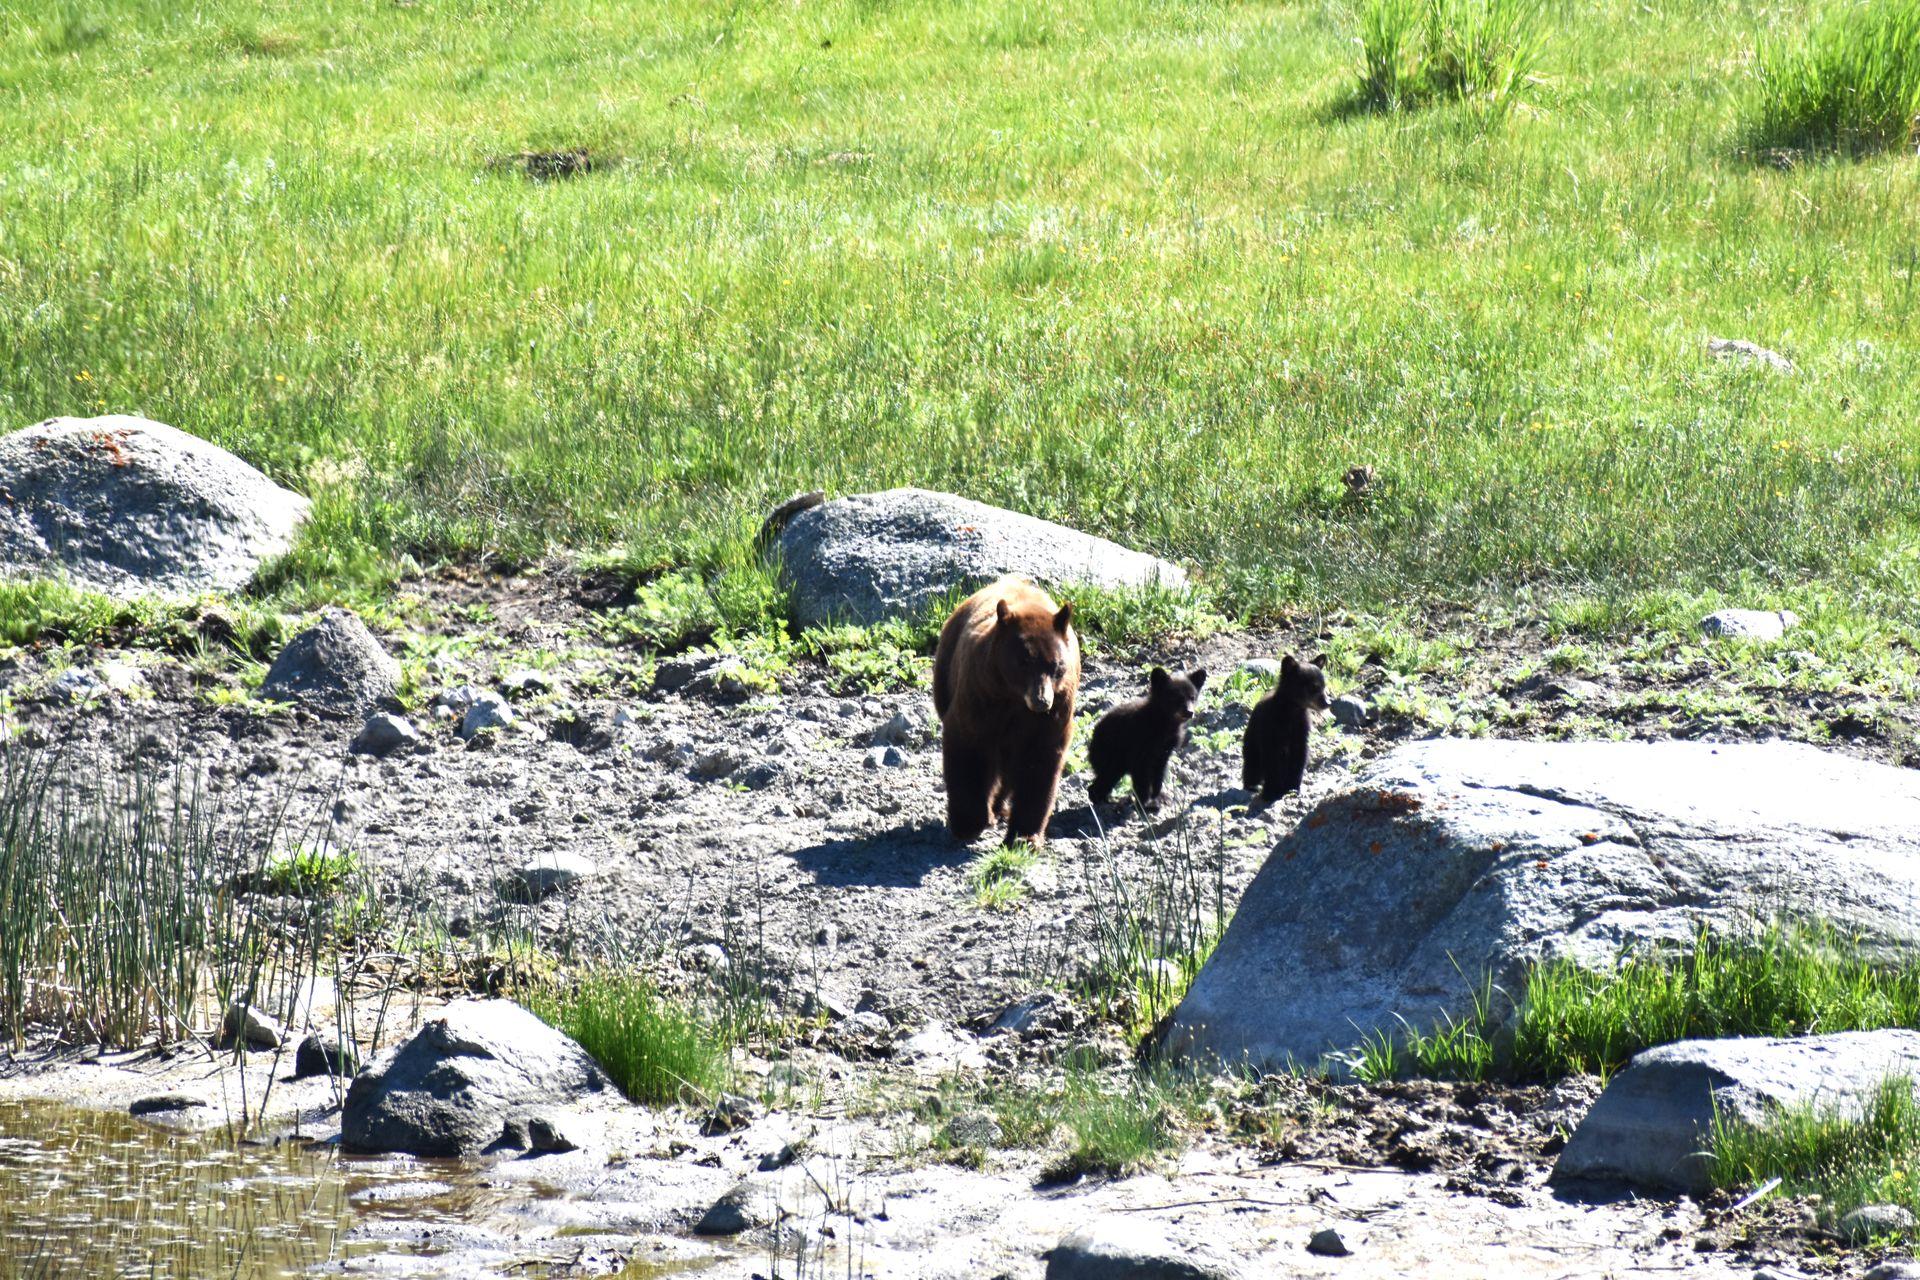 A mama bear with two babies walking next to her in Yellowstone.